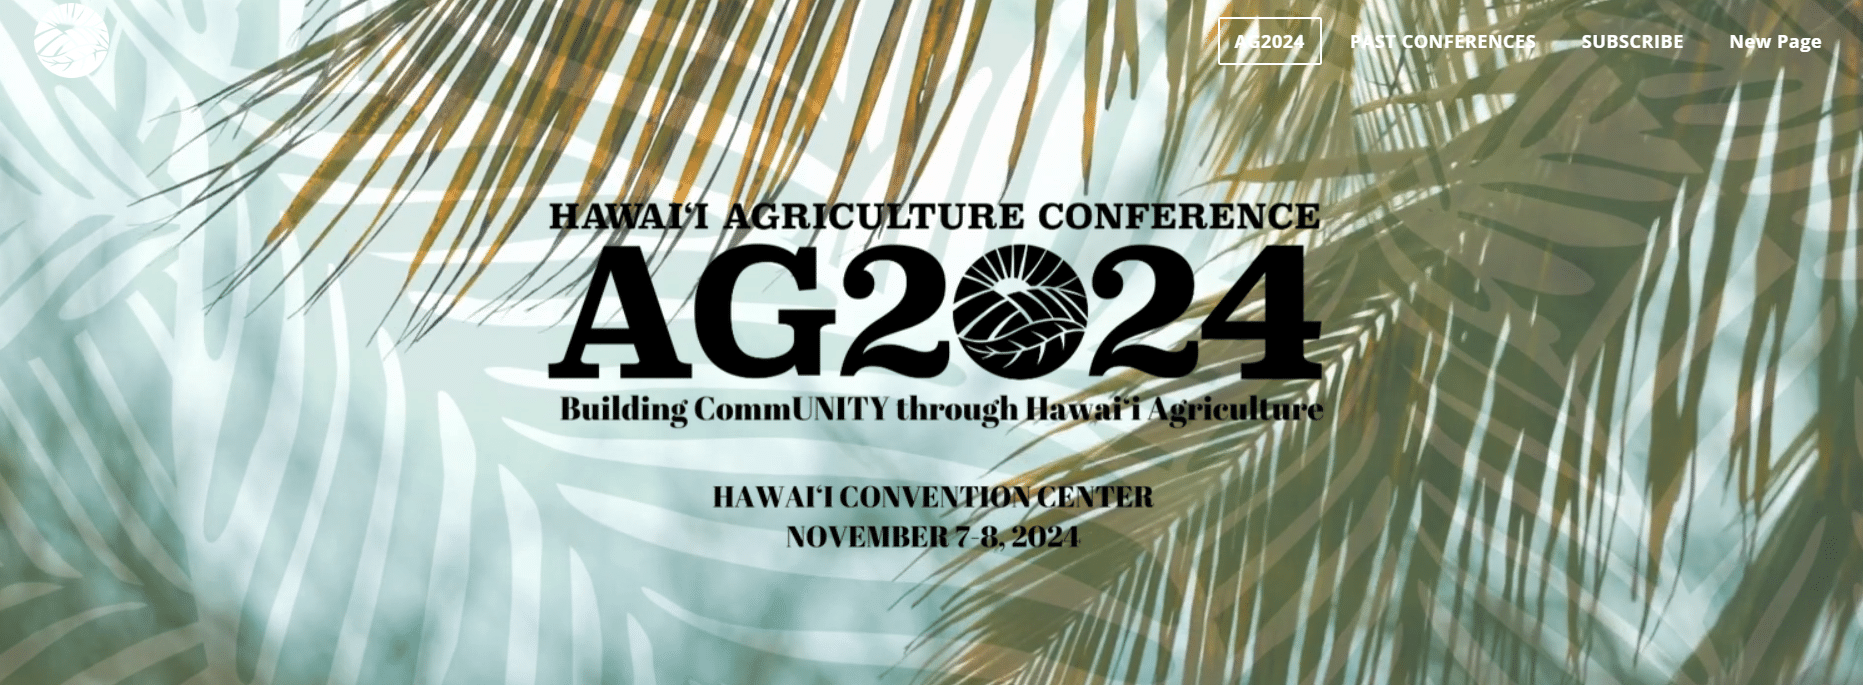 Hawaii Agriculture Conference (AG2024)